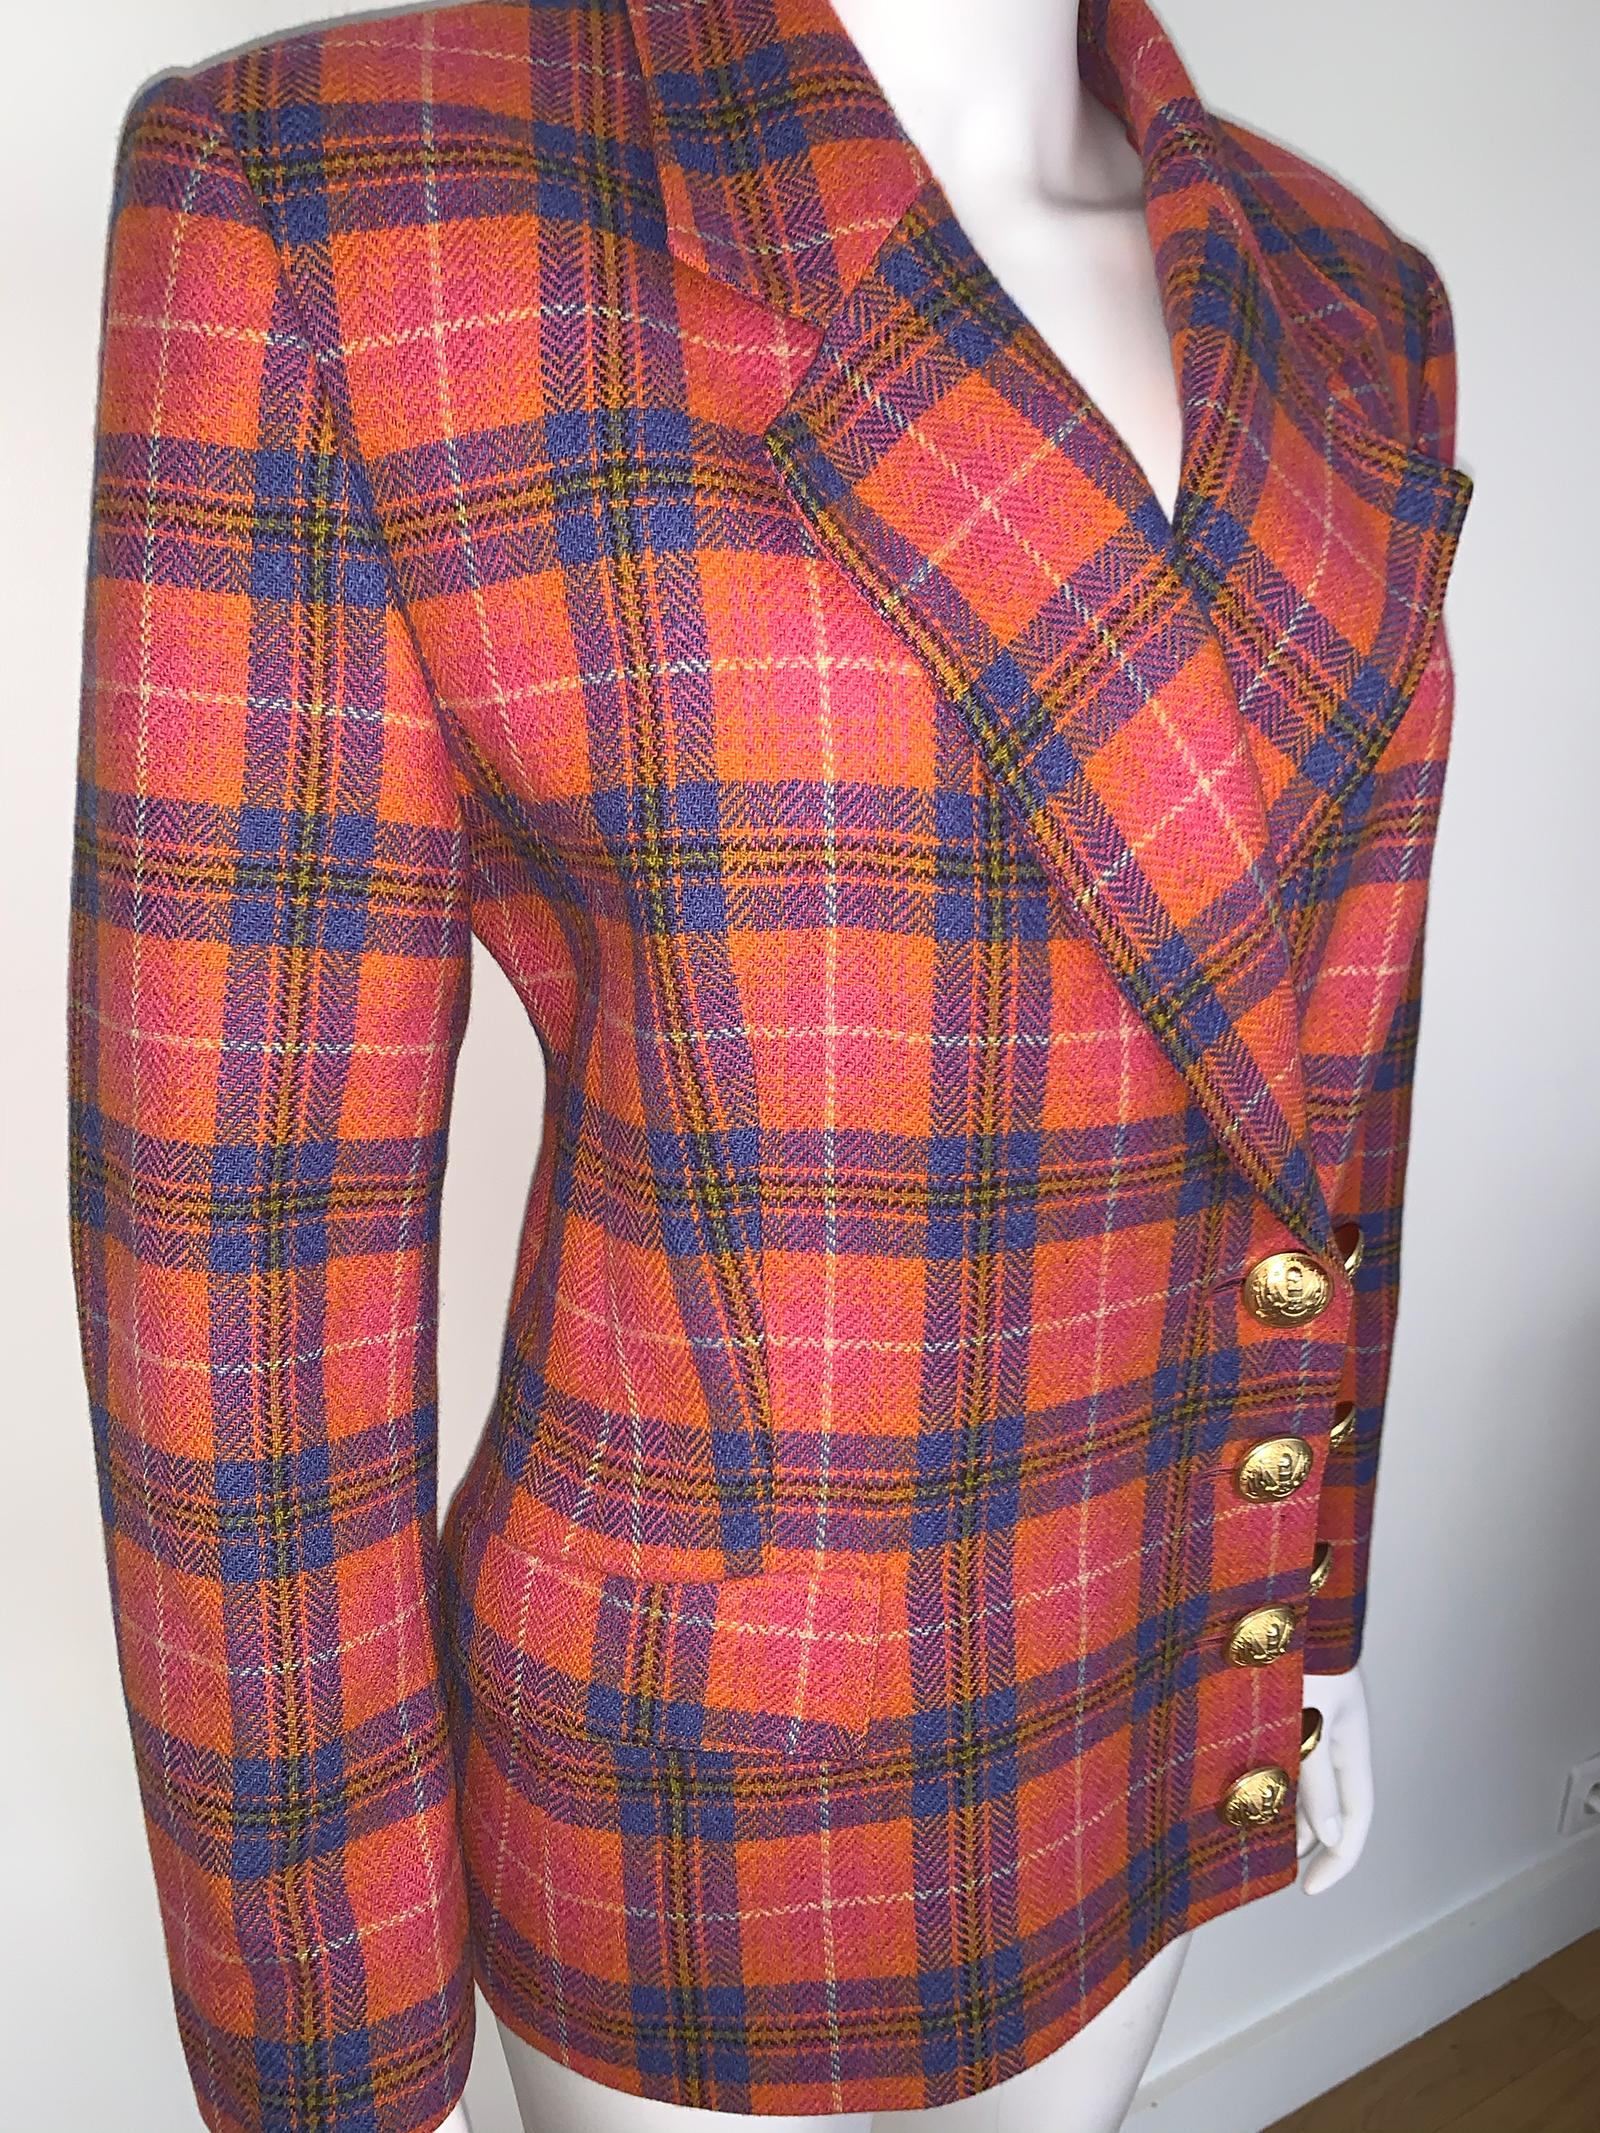 Vintage Guy Laroche Print jacket 
- Print Check 
- Double Breasted Jacket 
- Gold color buttons 
- Print color : Pasted orange and blue 
- Size 40
- Very Good condition 